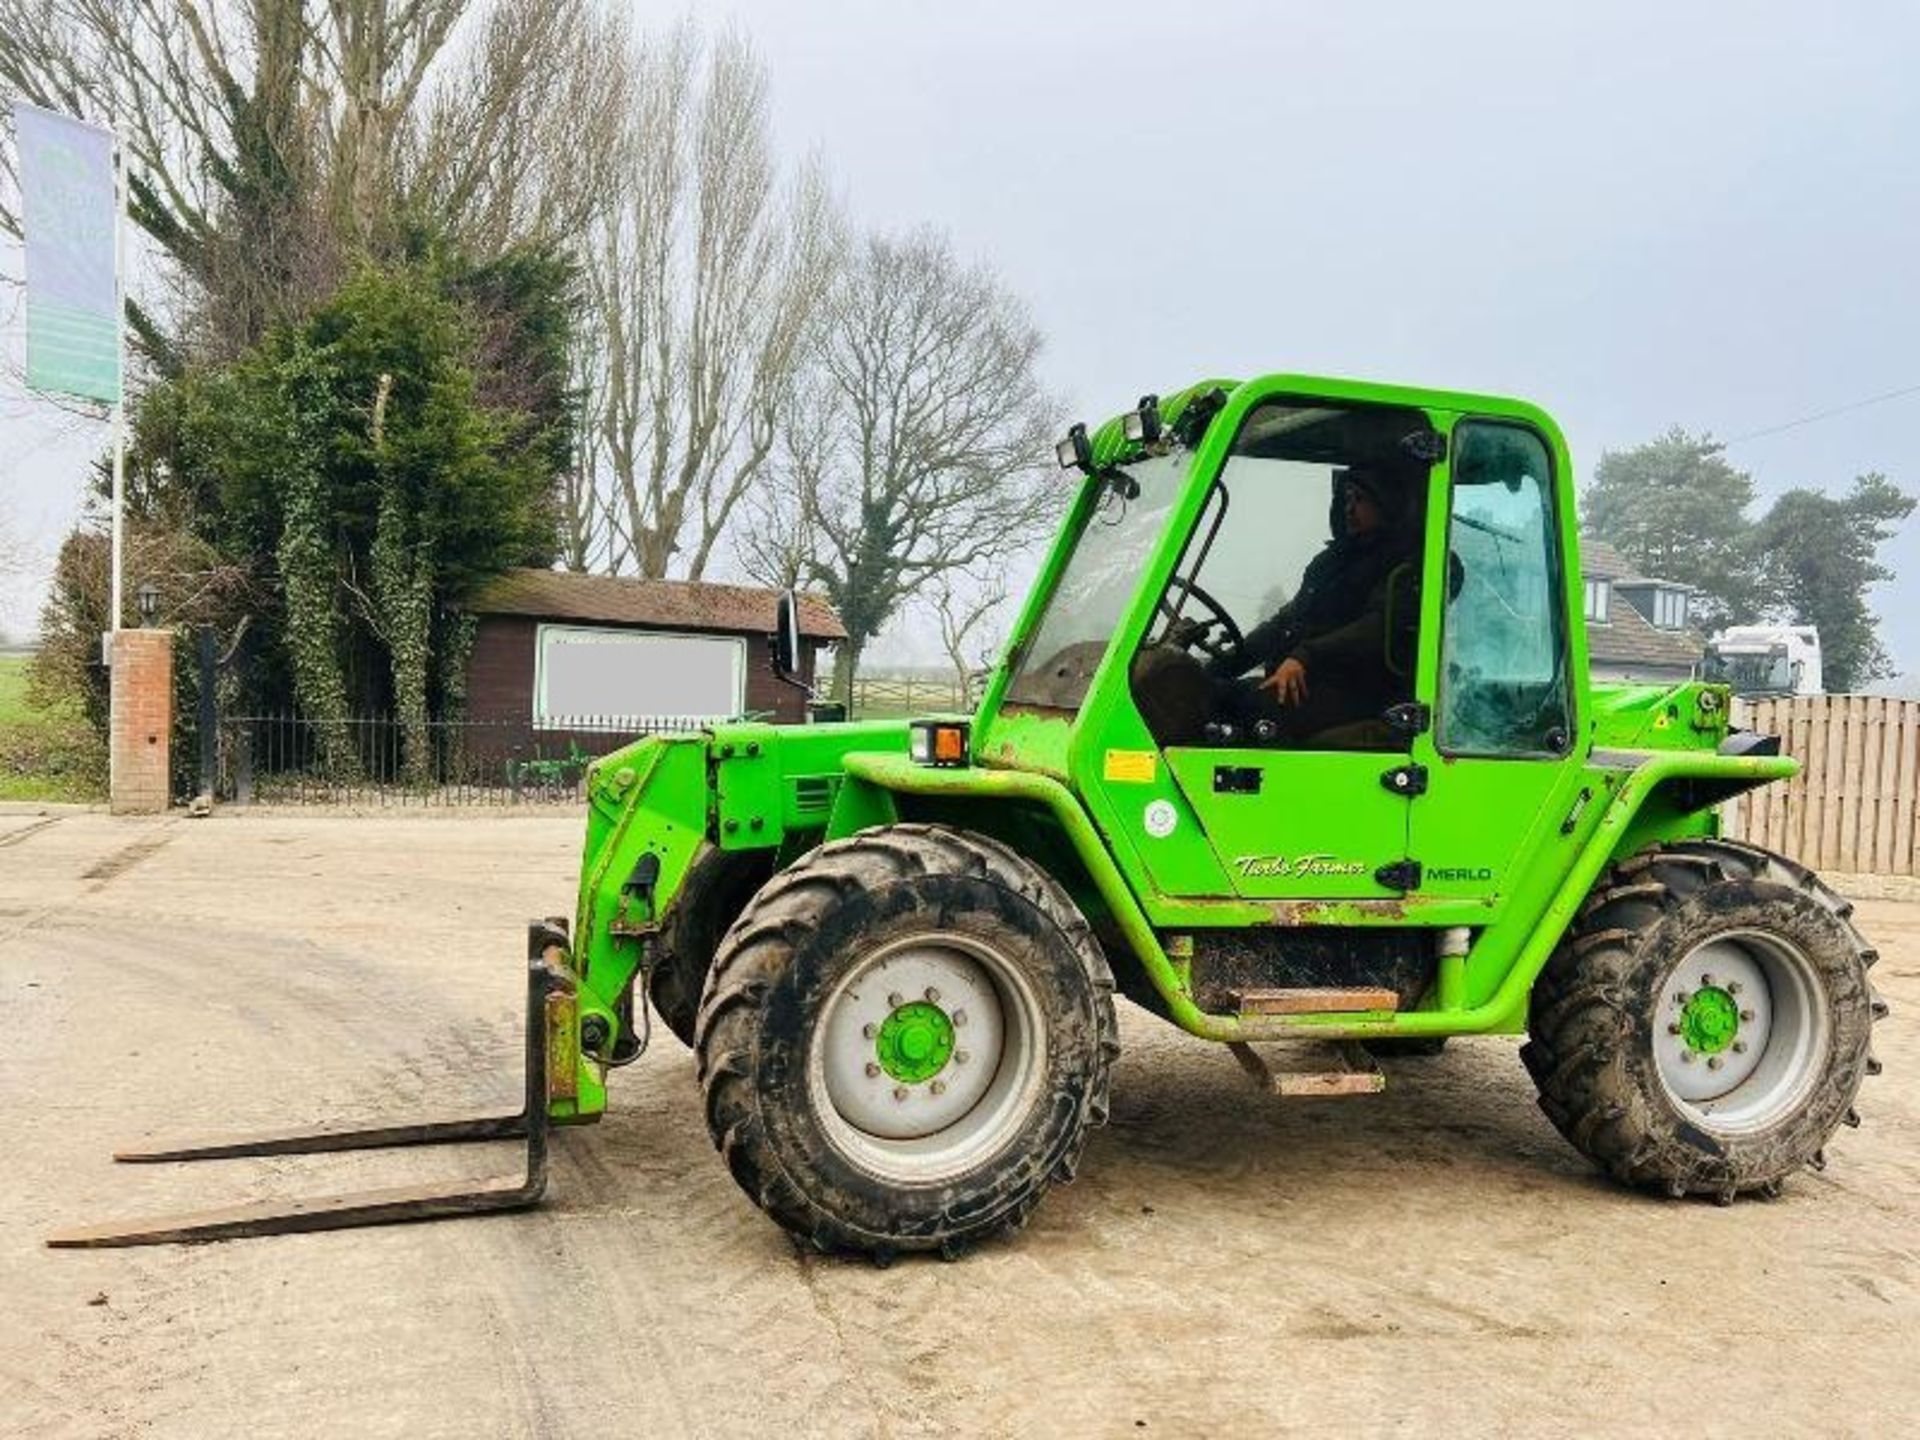 MERLO P32.7 4WD TELEHANDLER * AG-SPEC* C/W PALLET TINES & PICK UP HITCH - Image 9 of 10